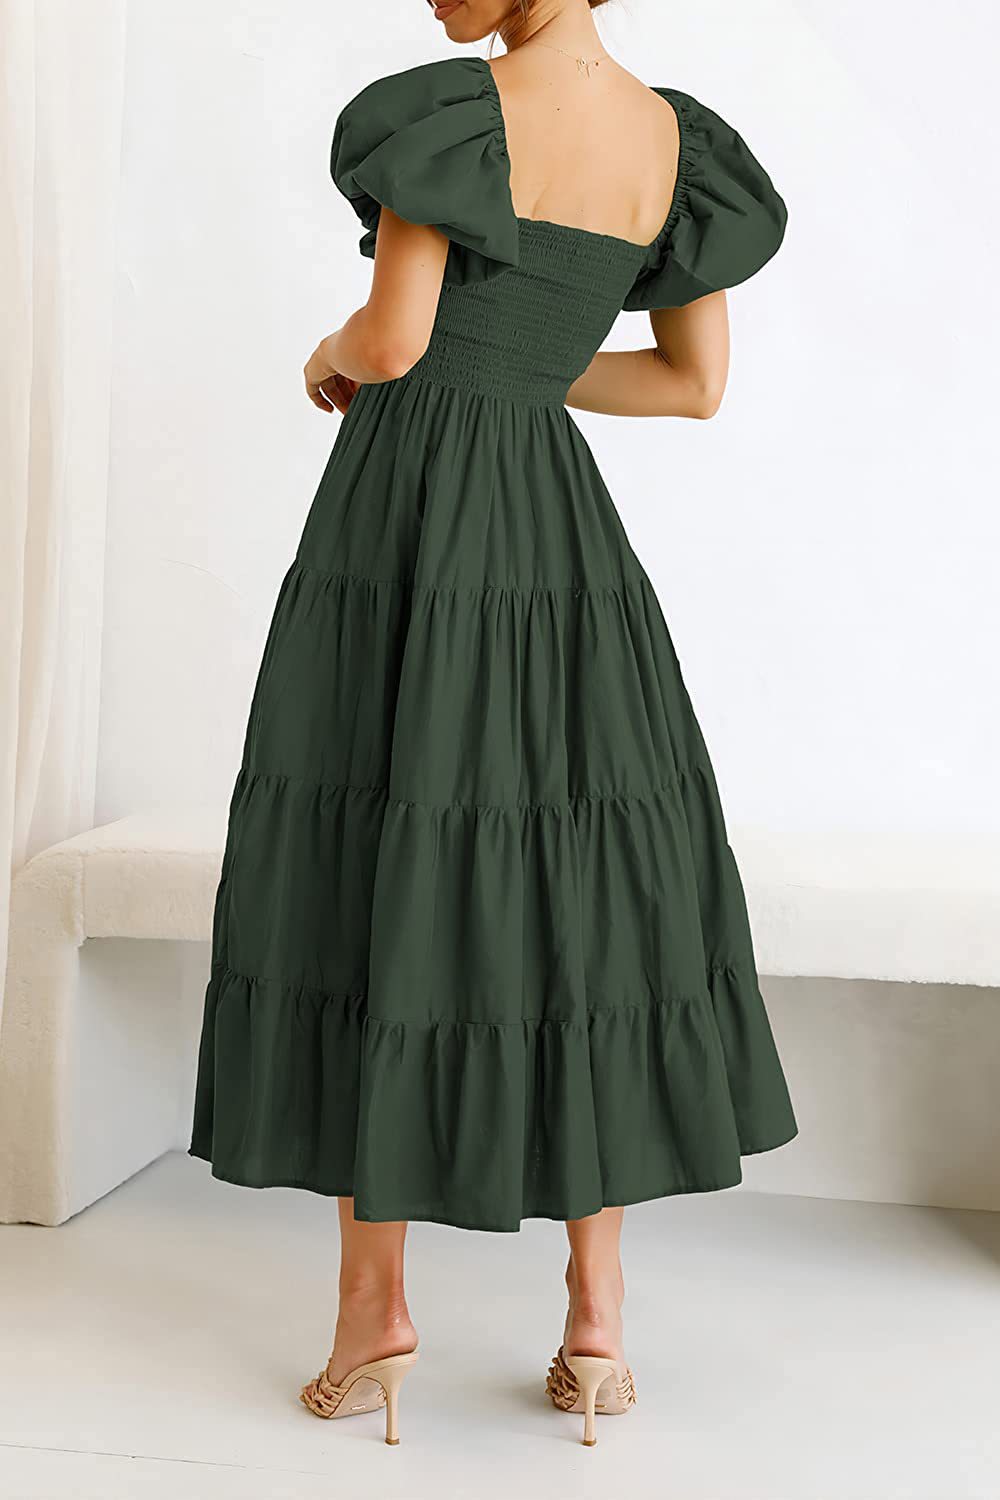 Square Collar Backless Puff Sleeve Pleated Short Sleeves Dress